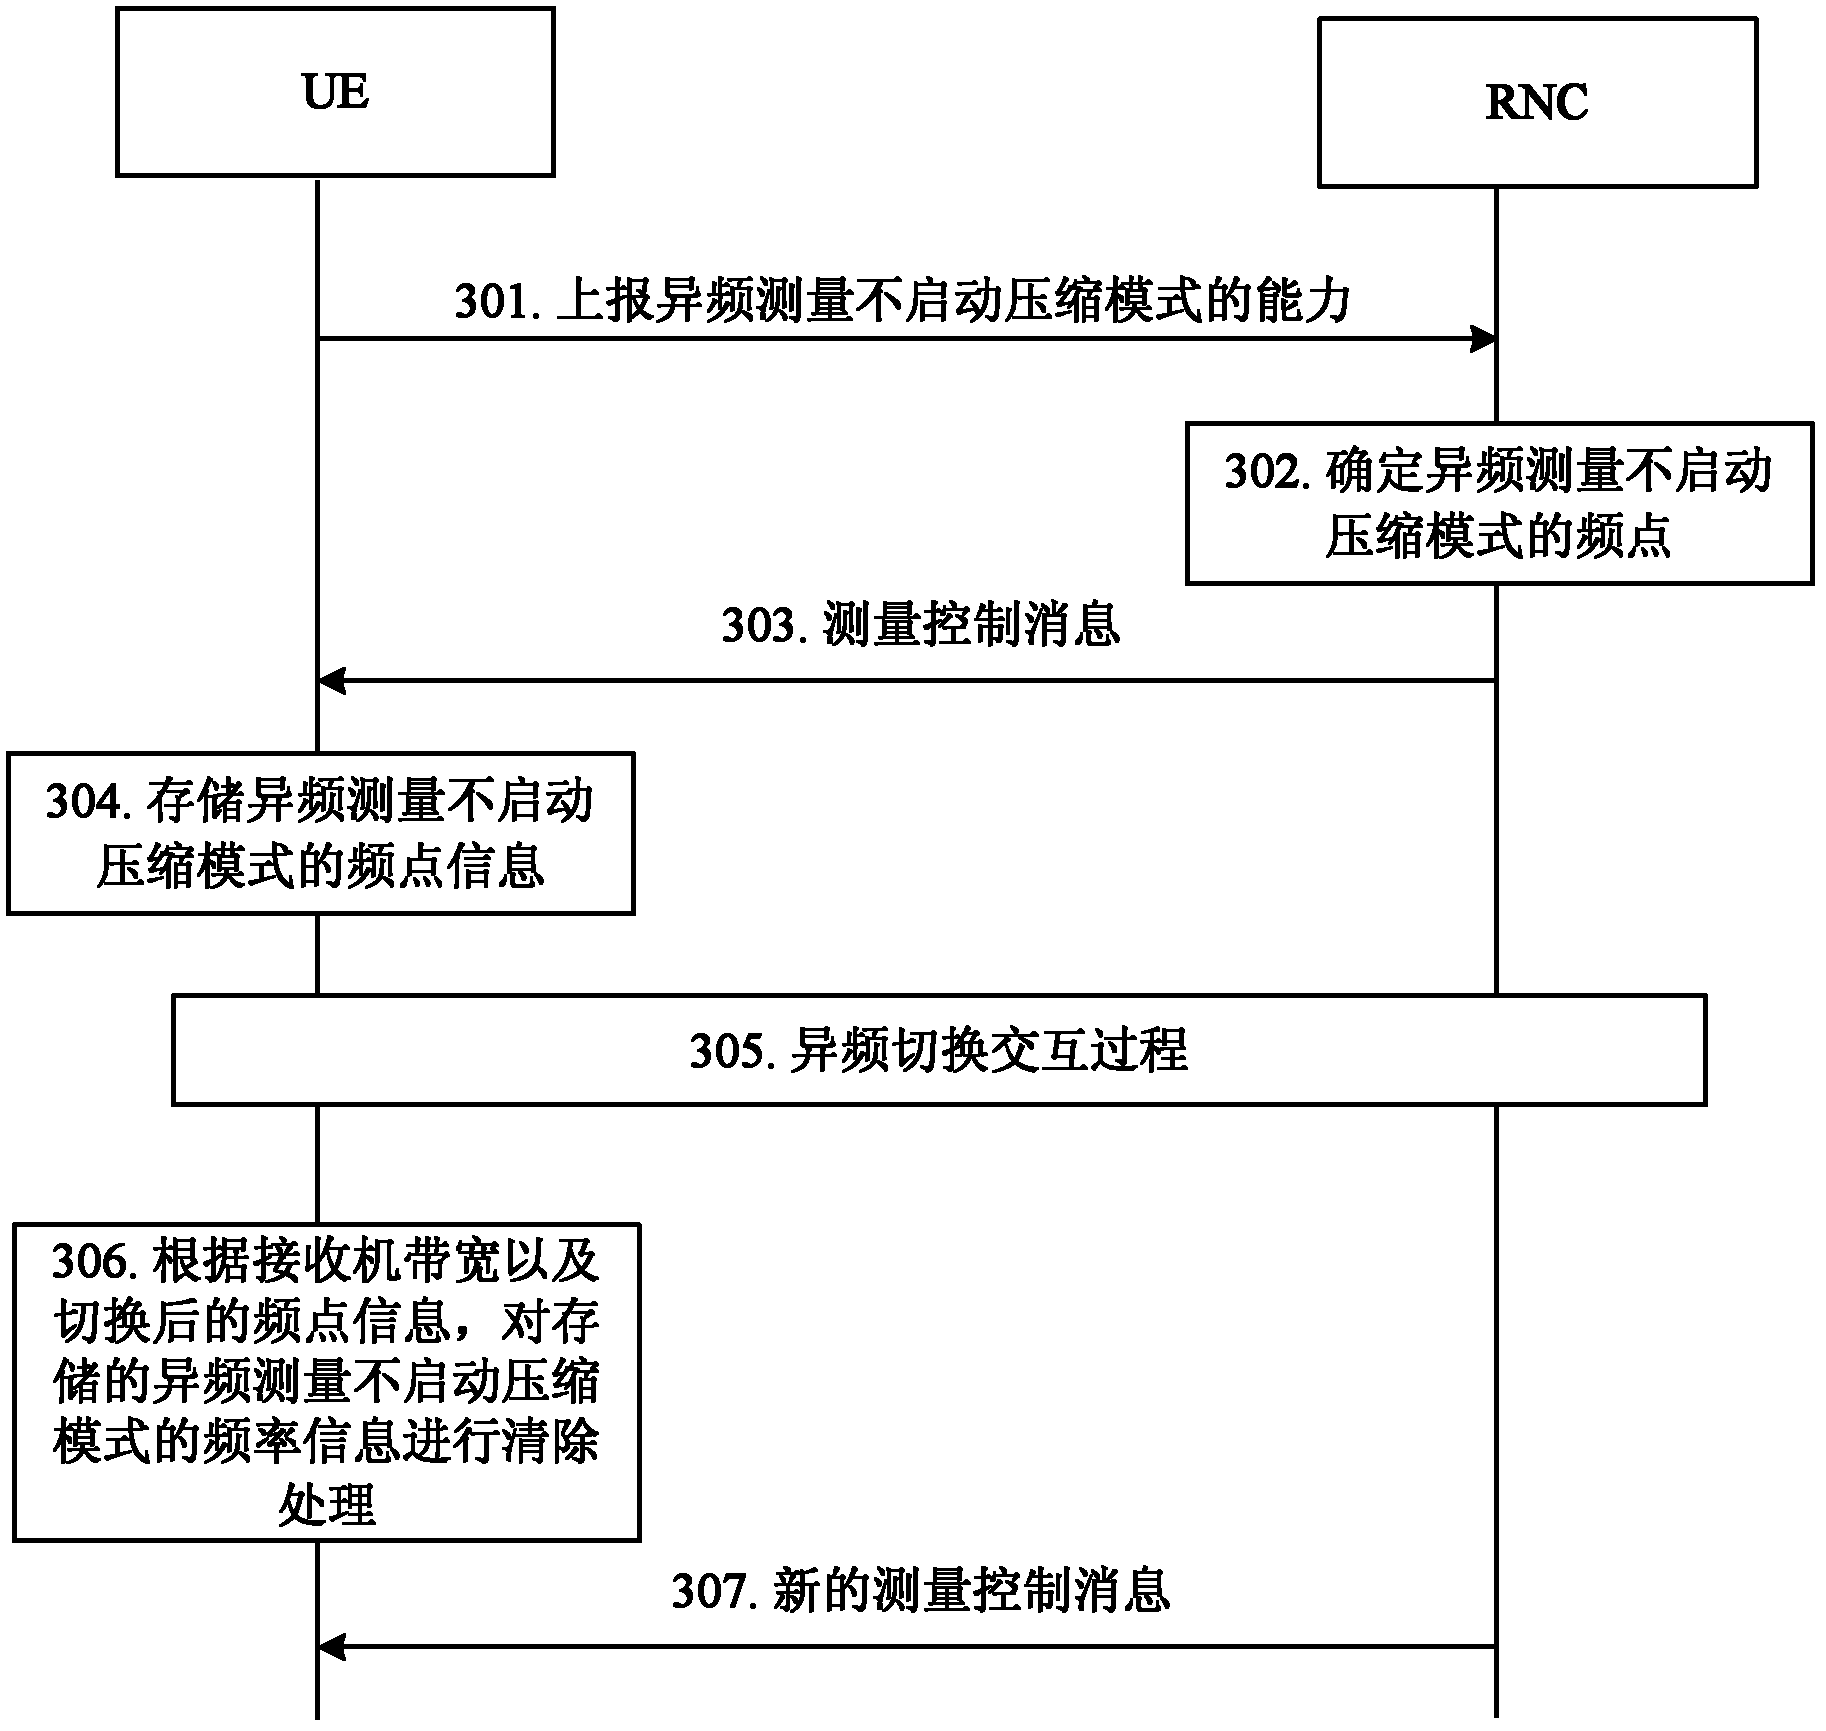 Frequency point information processing method and user equipment (UE)